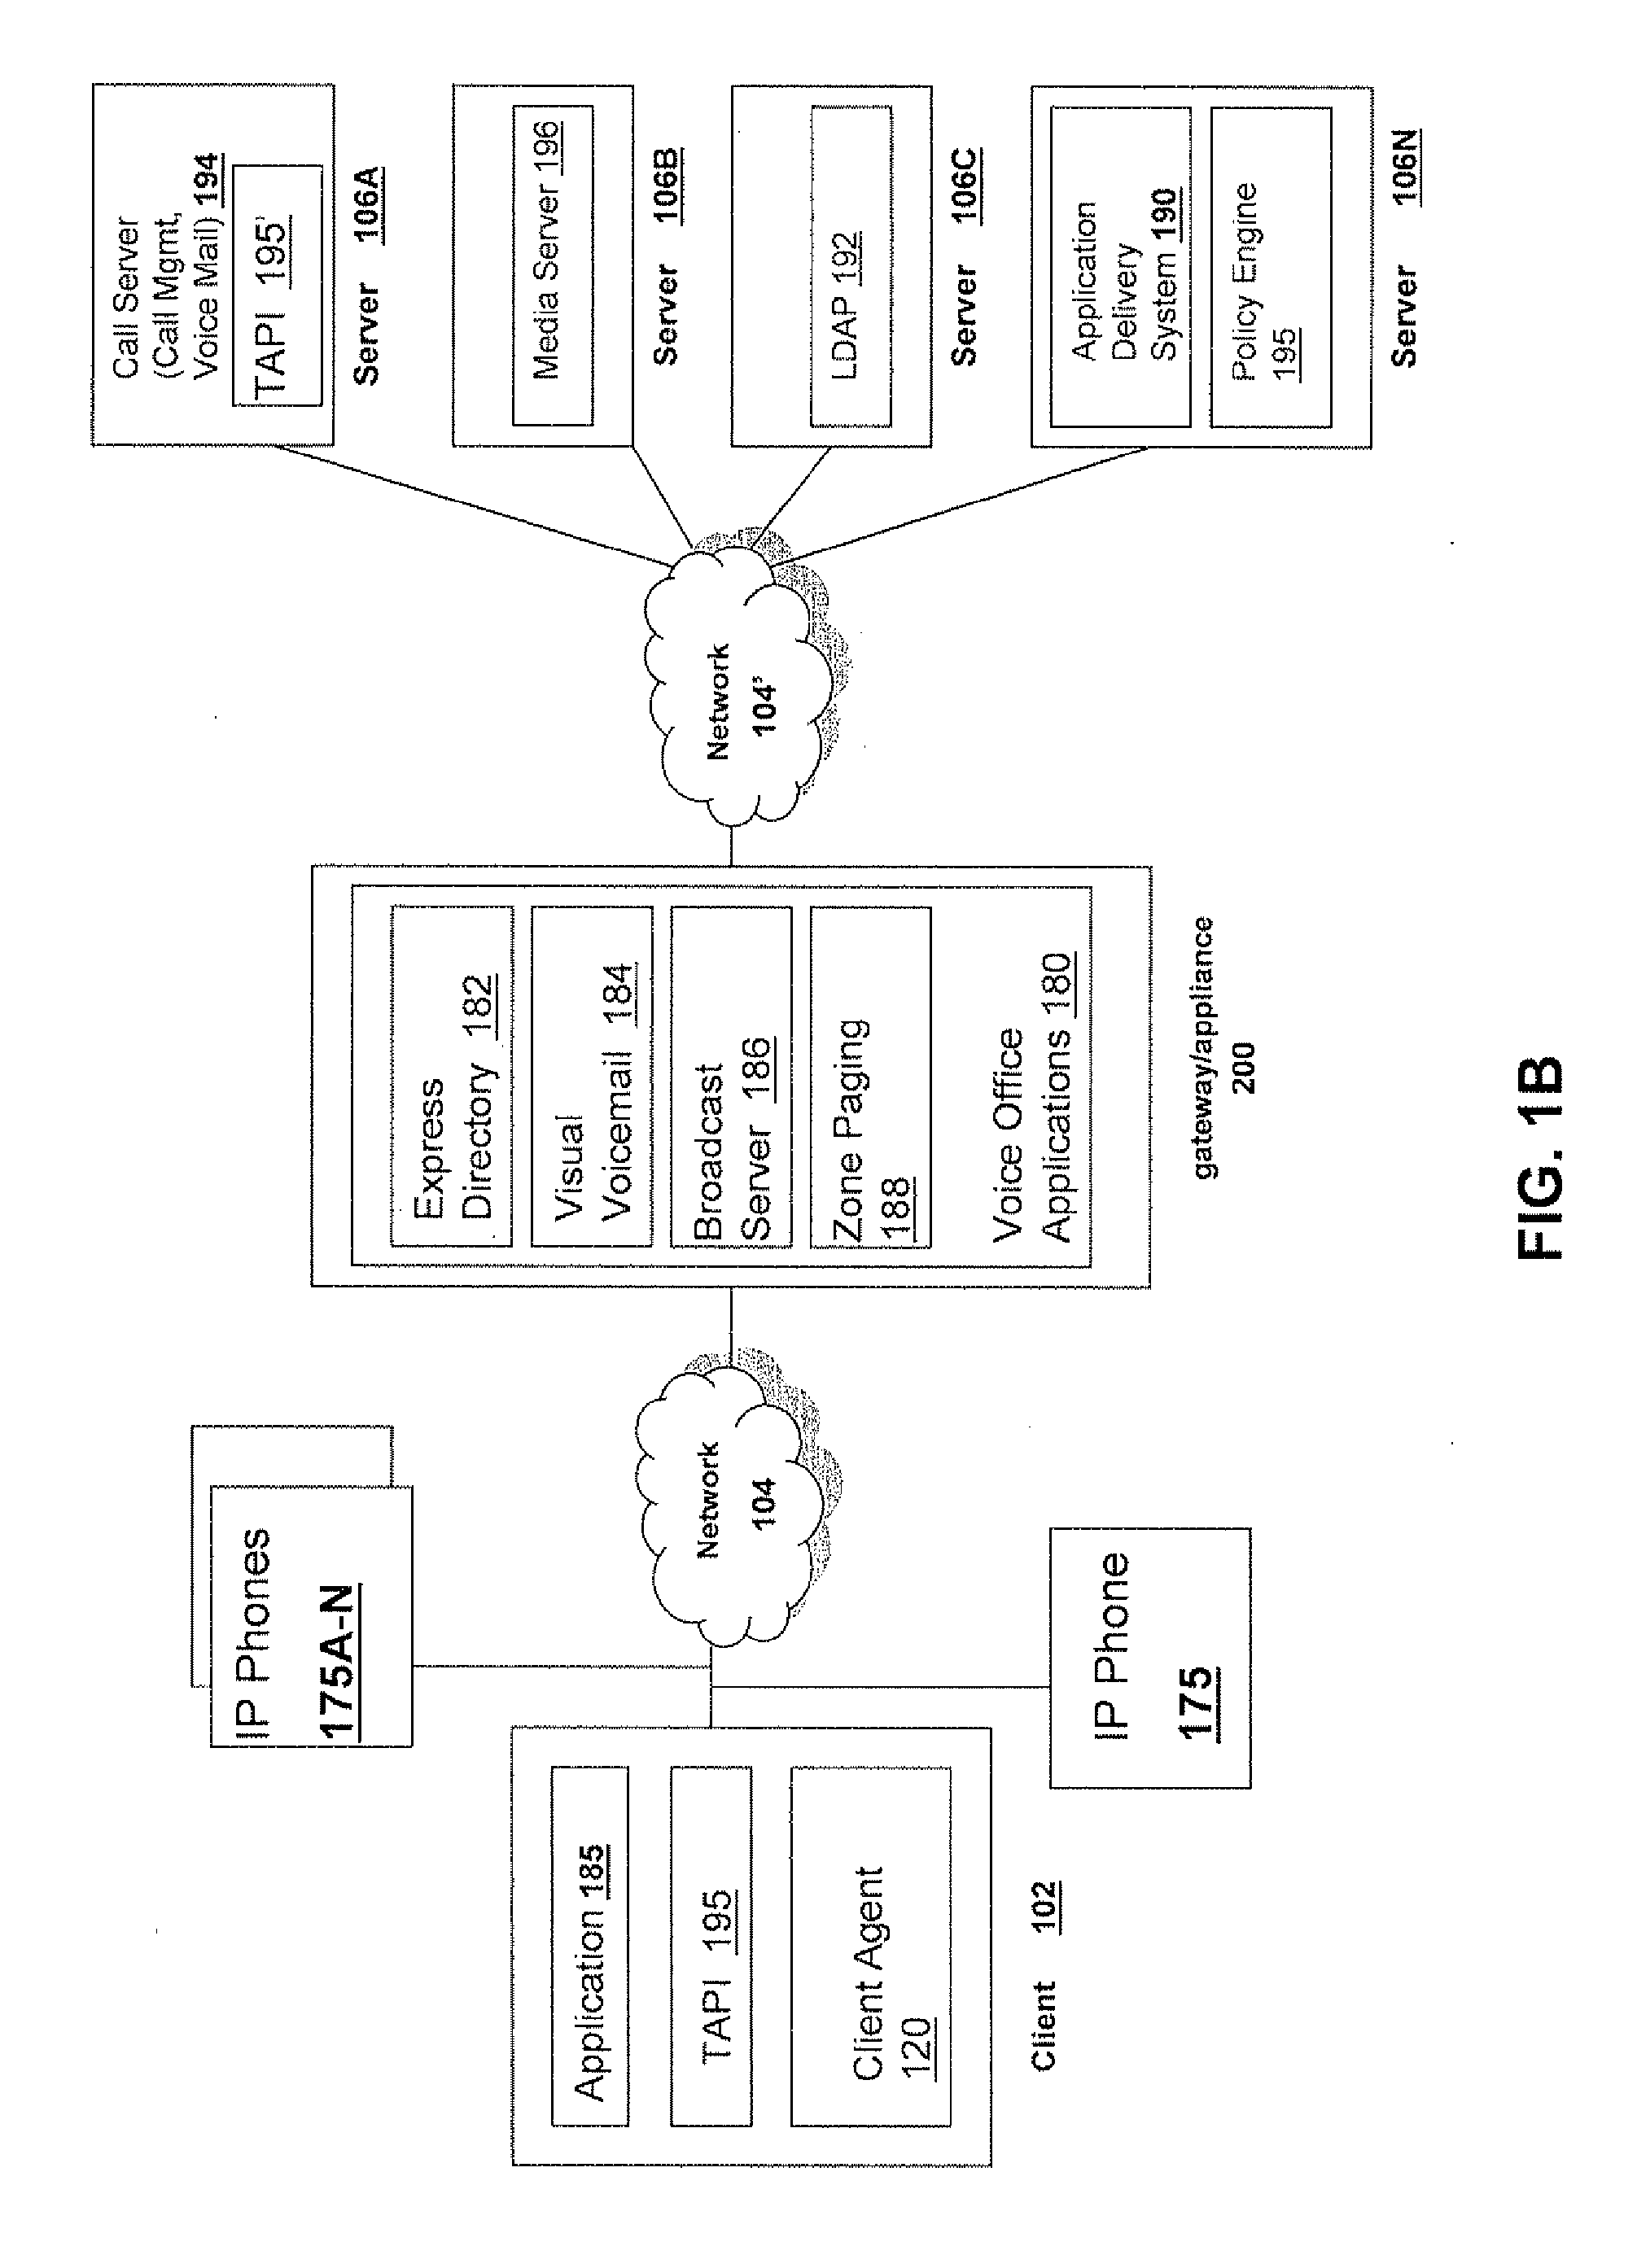 Systems and Methods for Isolating On-Screen Textual Data